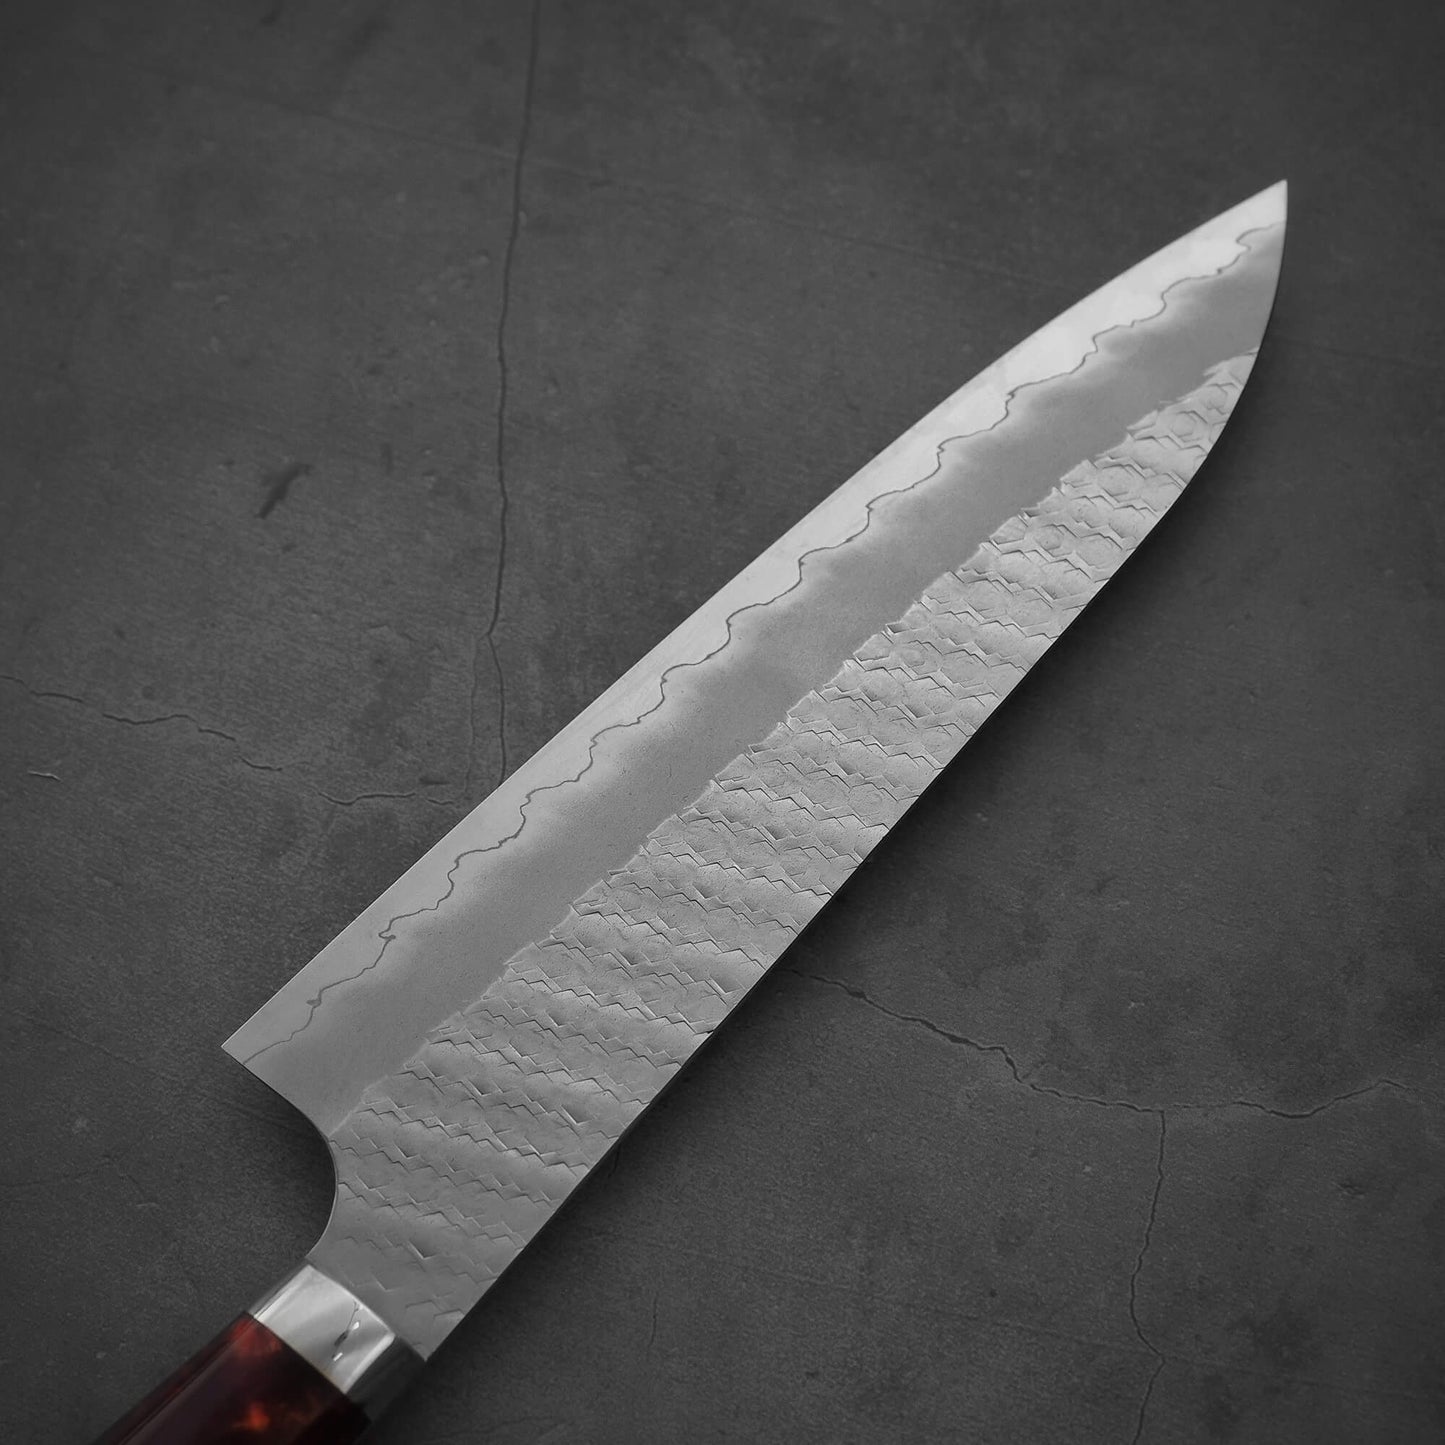 Front view of the blade of 210mm Nigara tsuchime SG2 gyuto knife with red handle on the other side